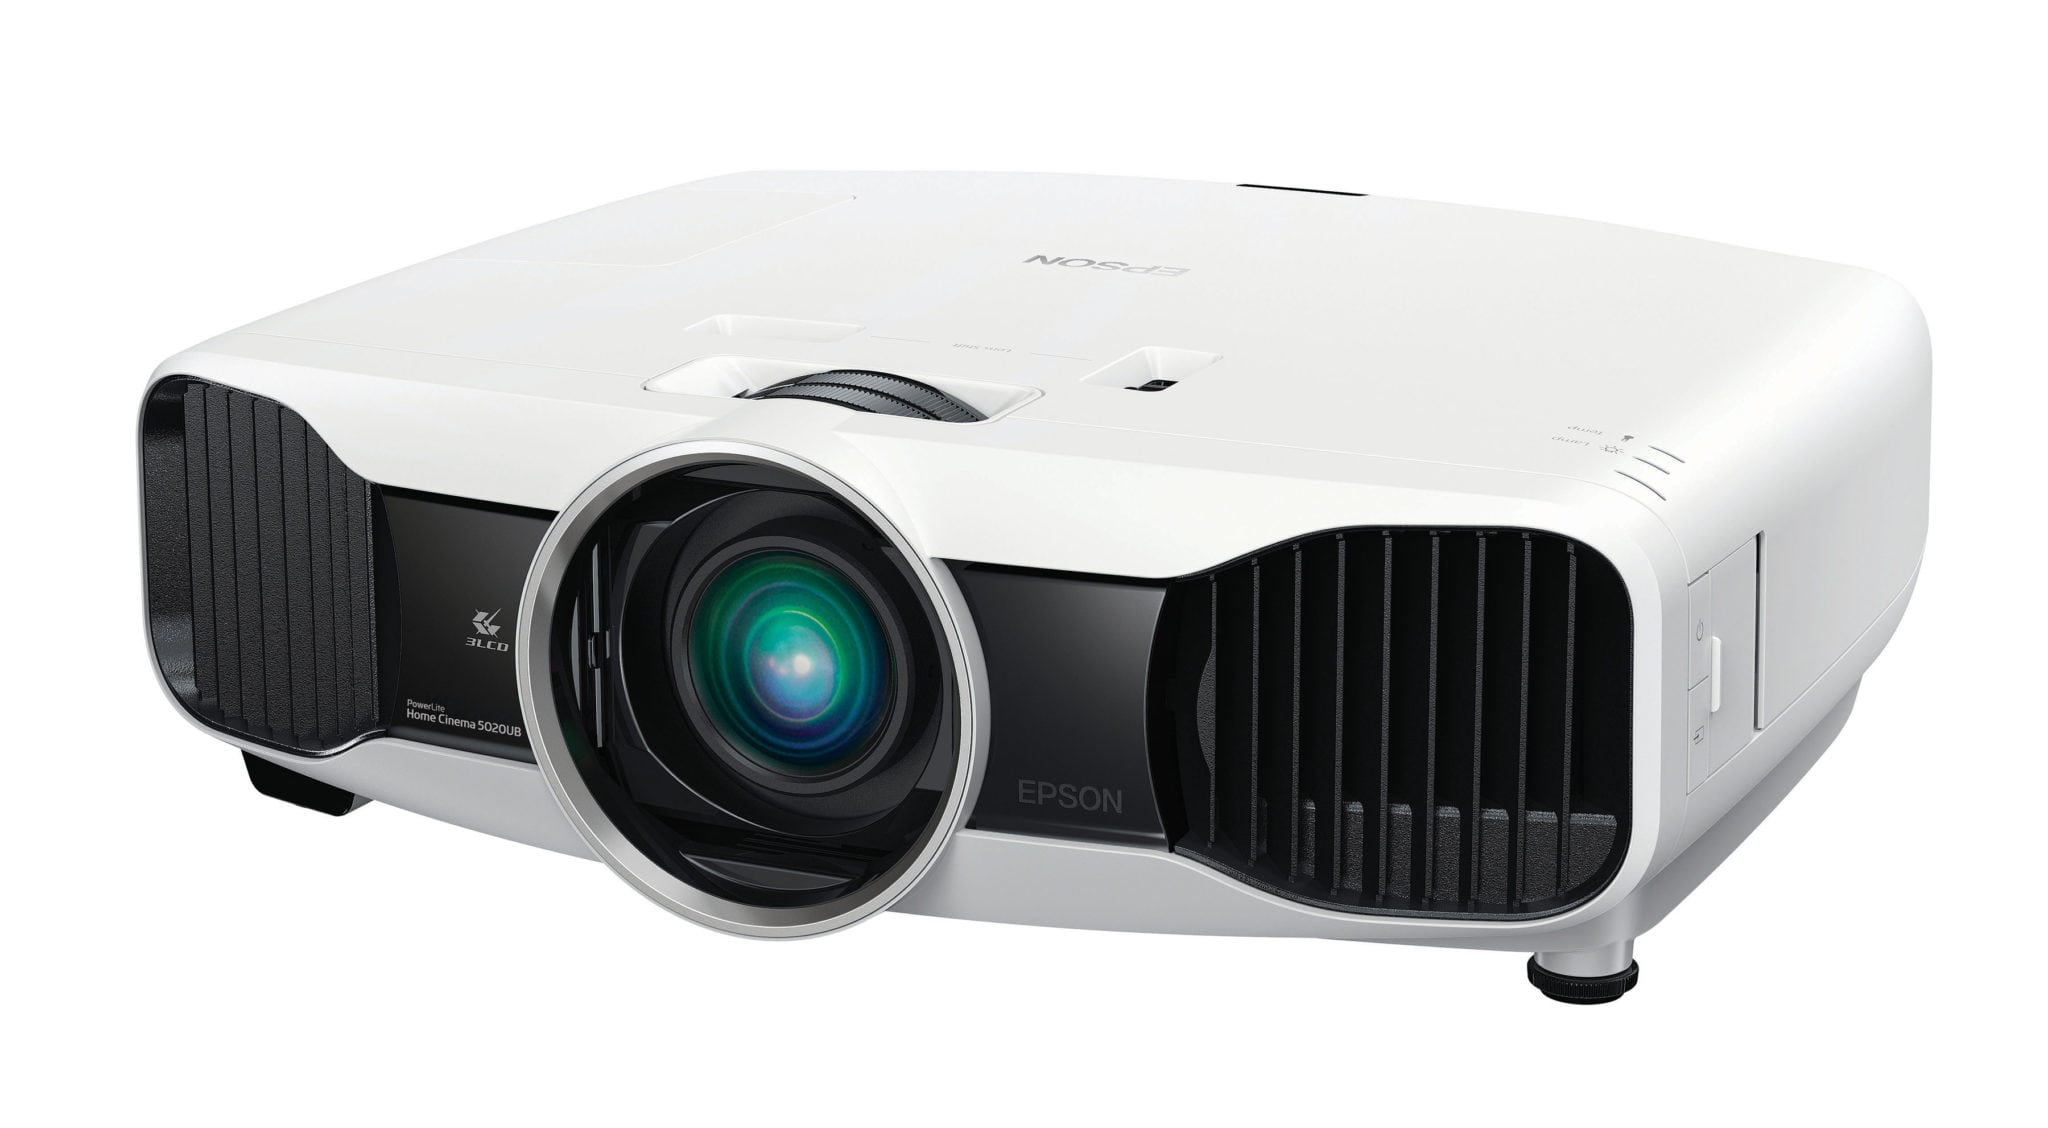 Guide To Buying the Best Home Theater Projector for You - Projector Reviews